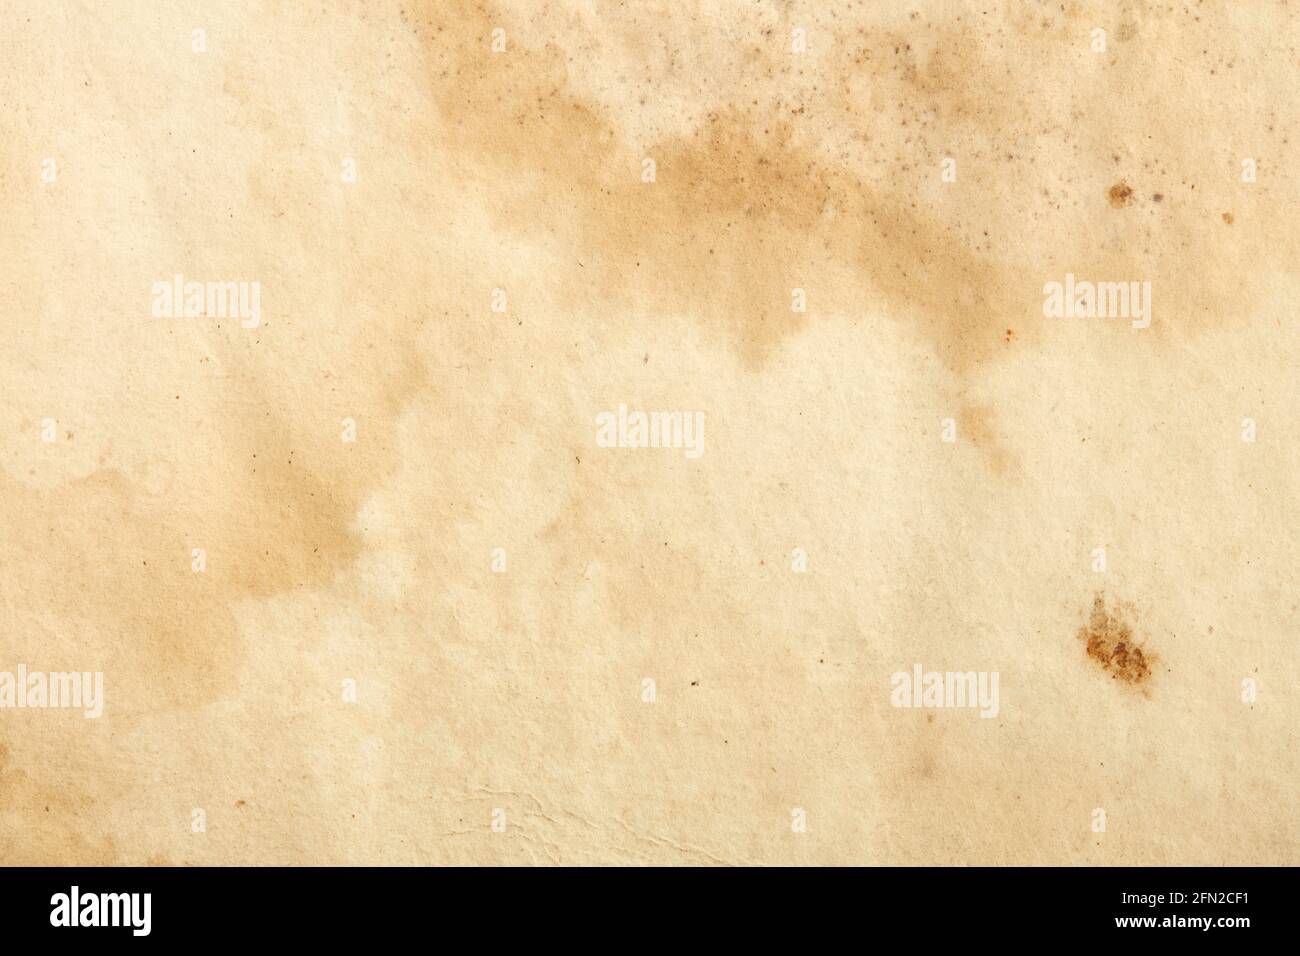 Old paper with sepia stains and mold texture background Stock Photo